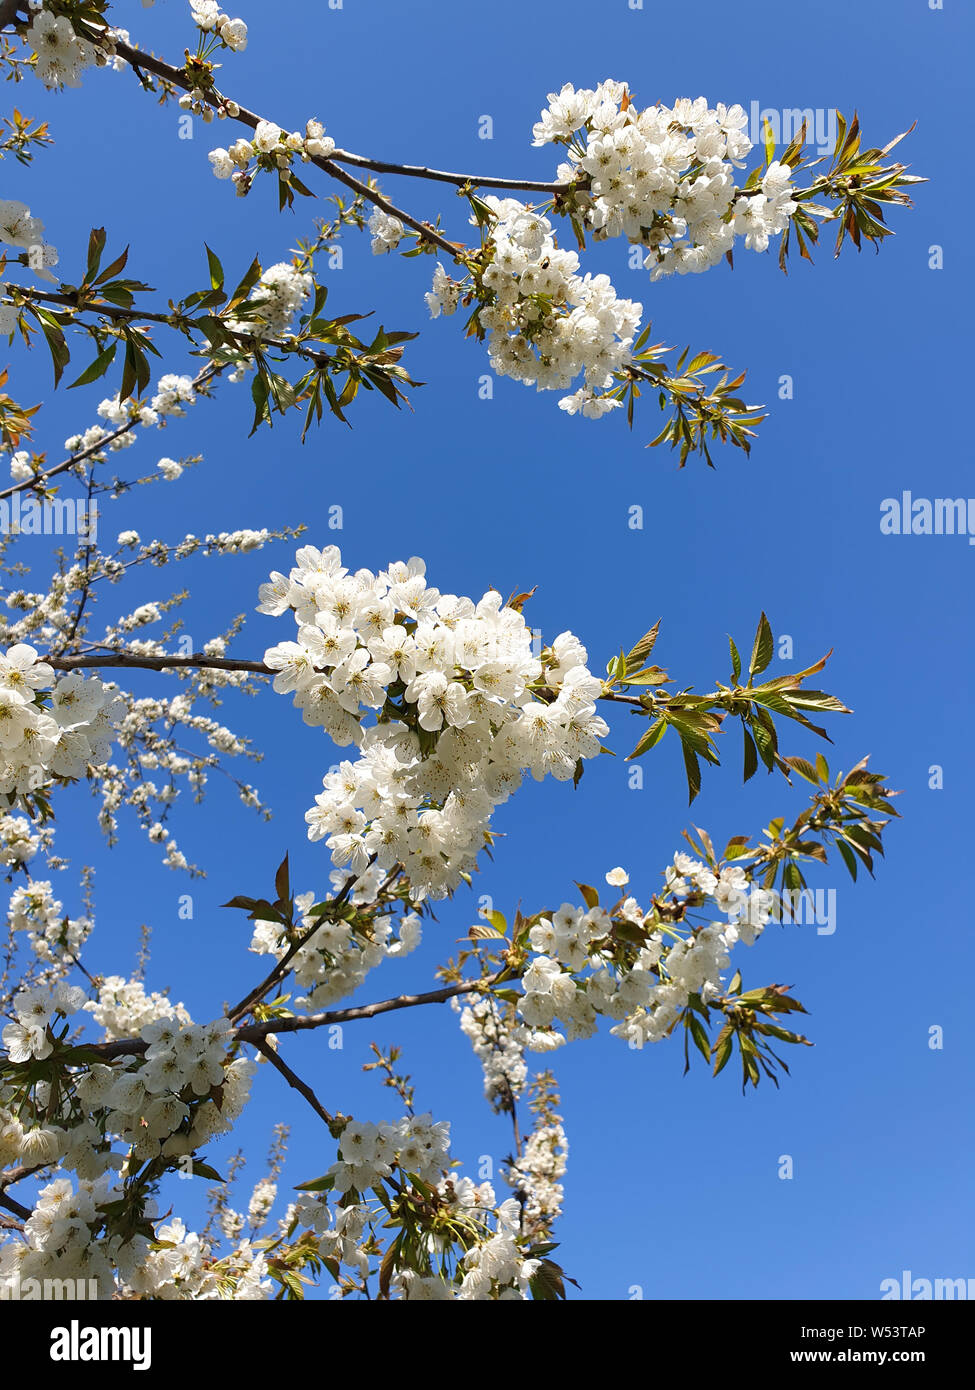 White cherry blossoms on a japanese cherry tree against clear blue sky in Tokyo, Japan Stock Photo